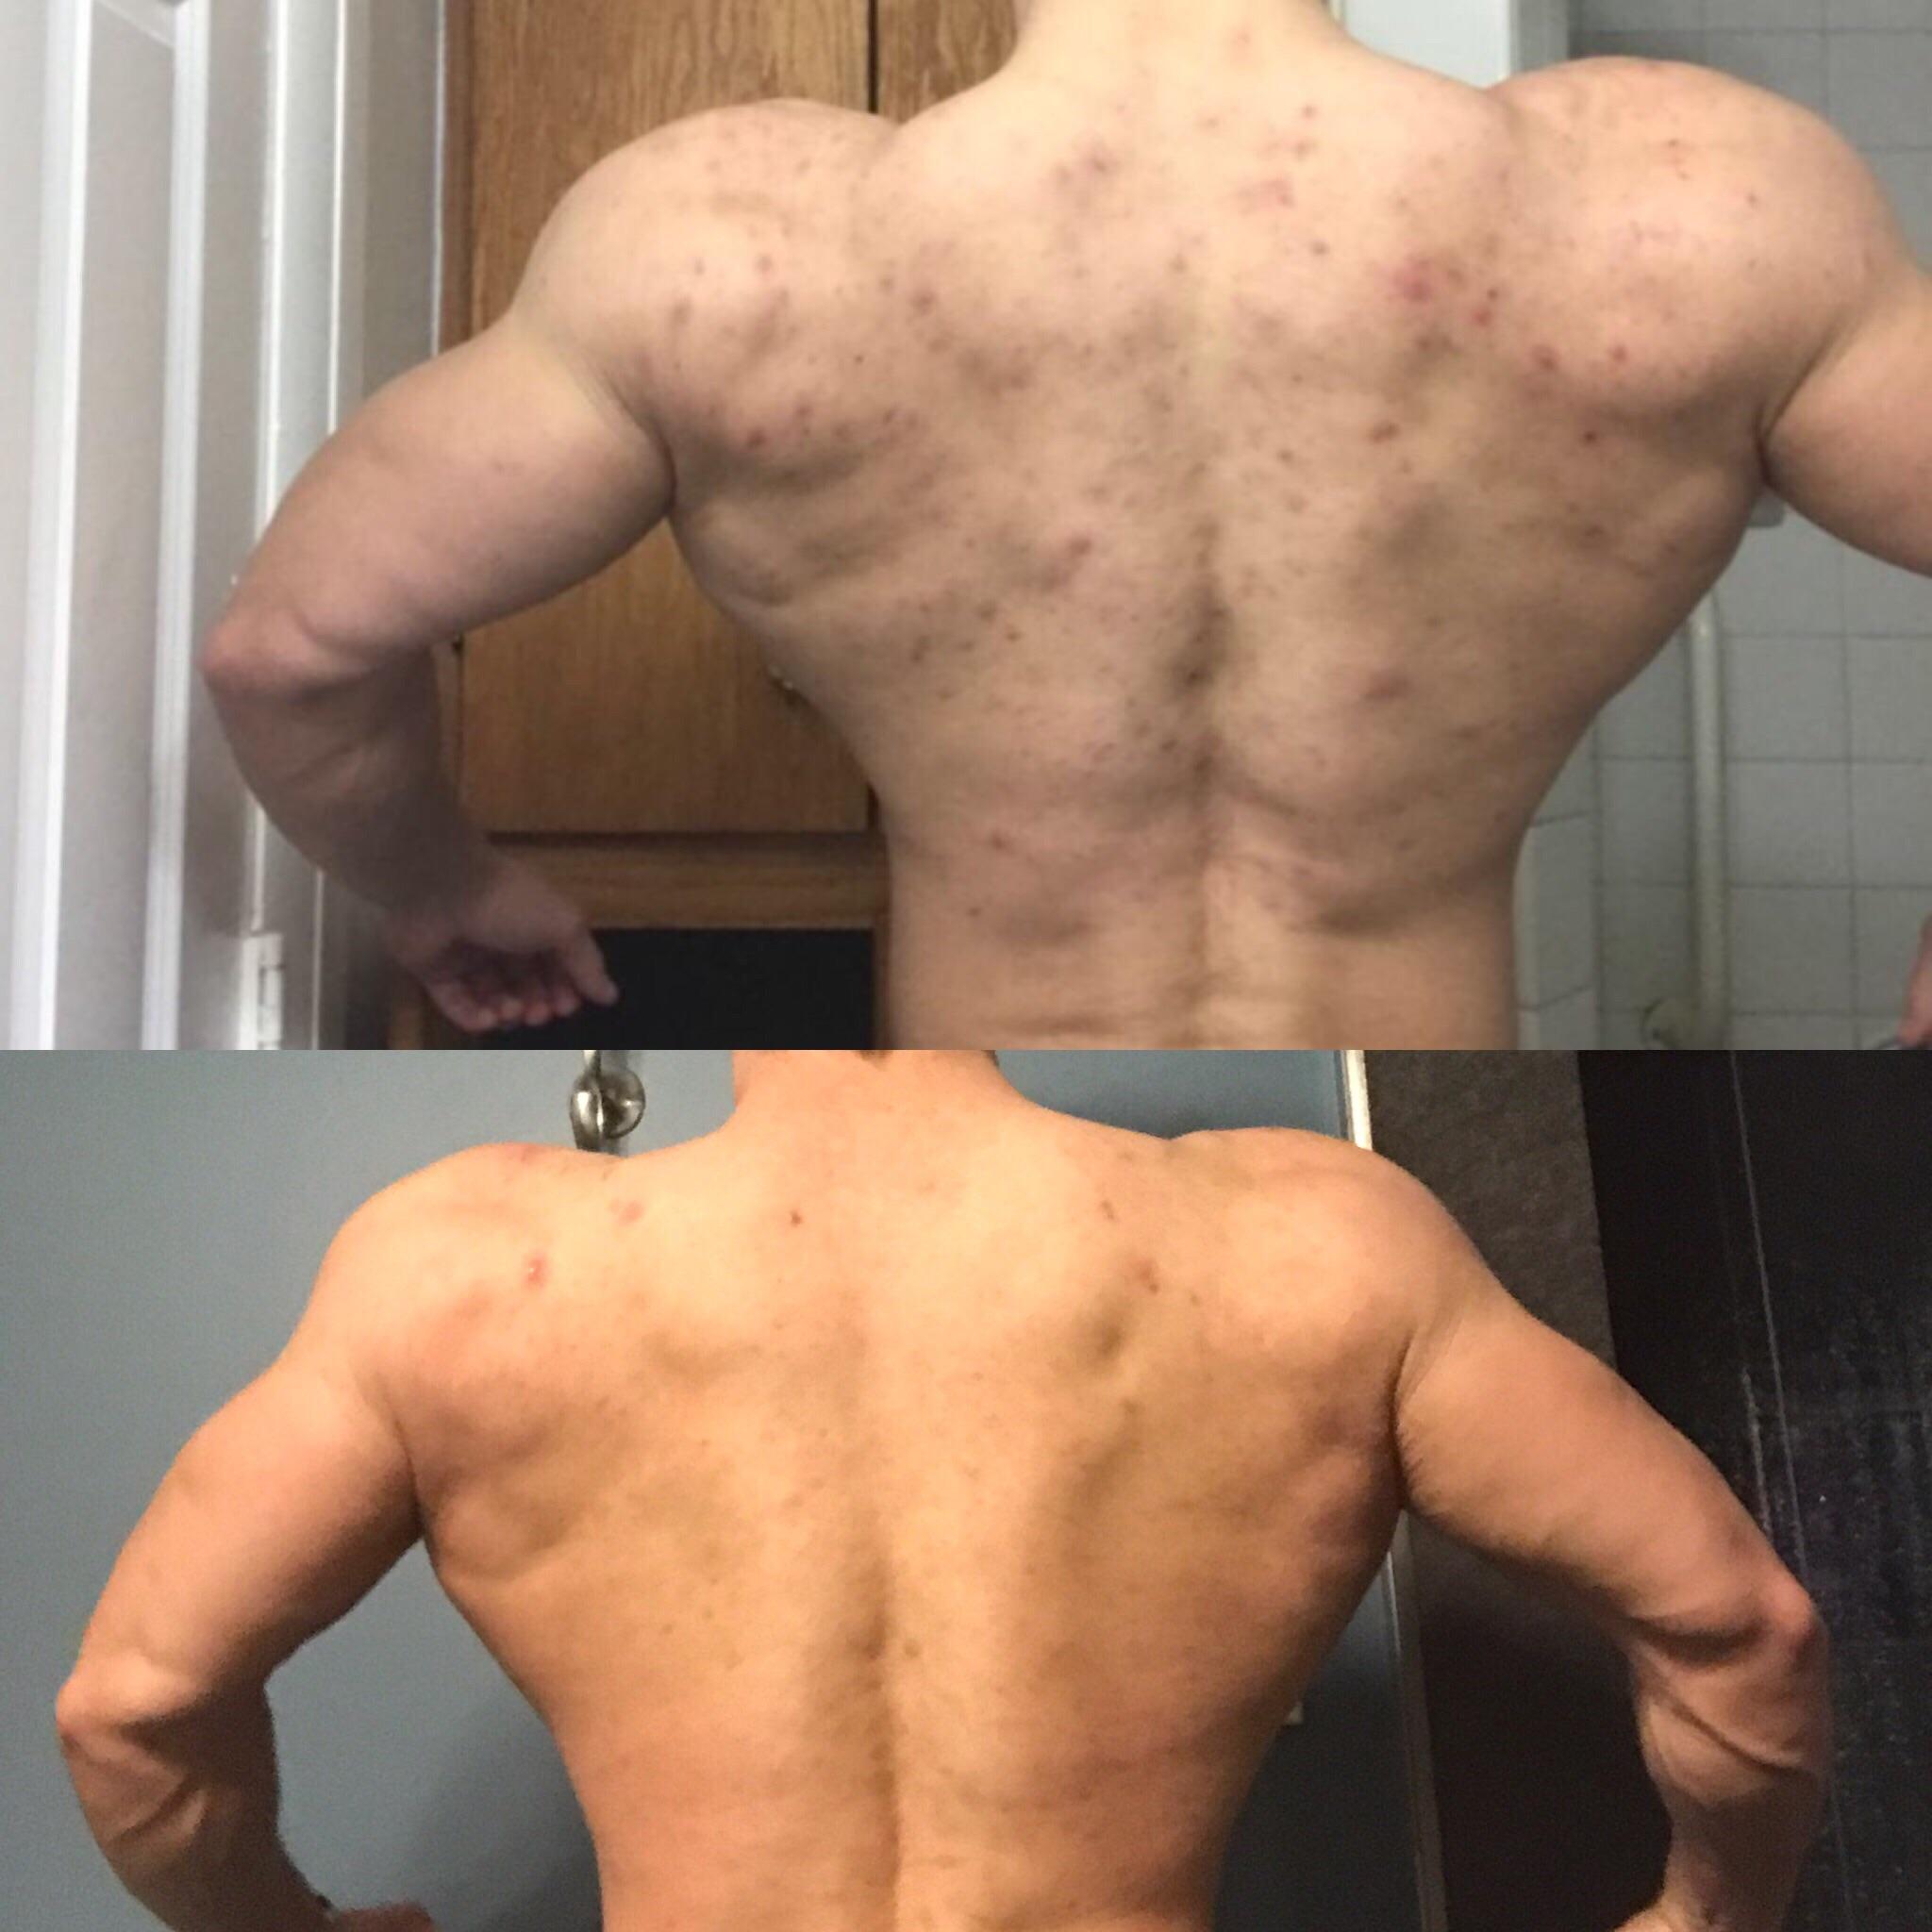 Accutane and Bodybuilding Reddit: Community Experiences Shared